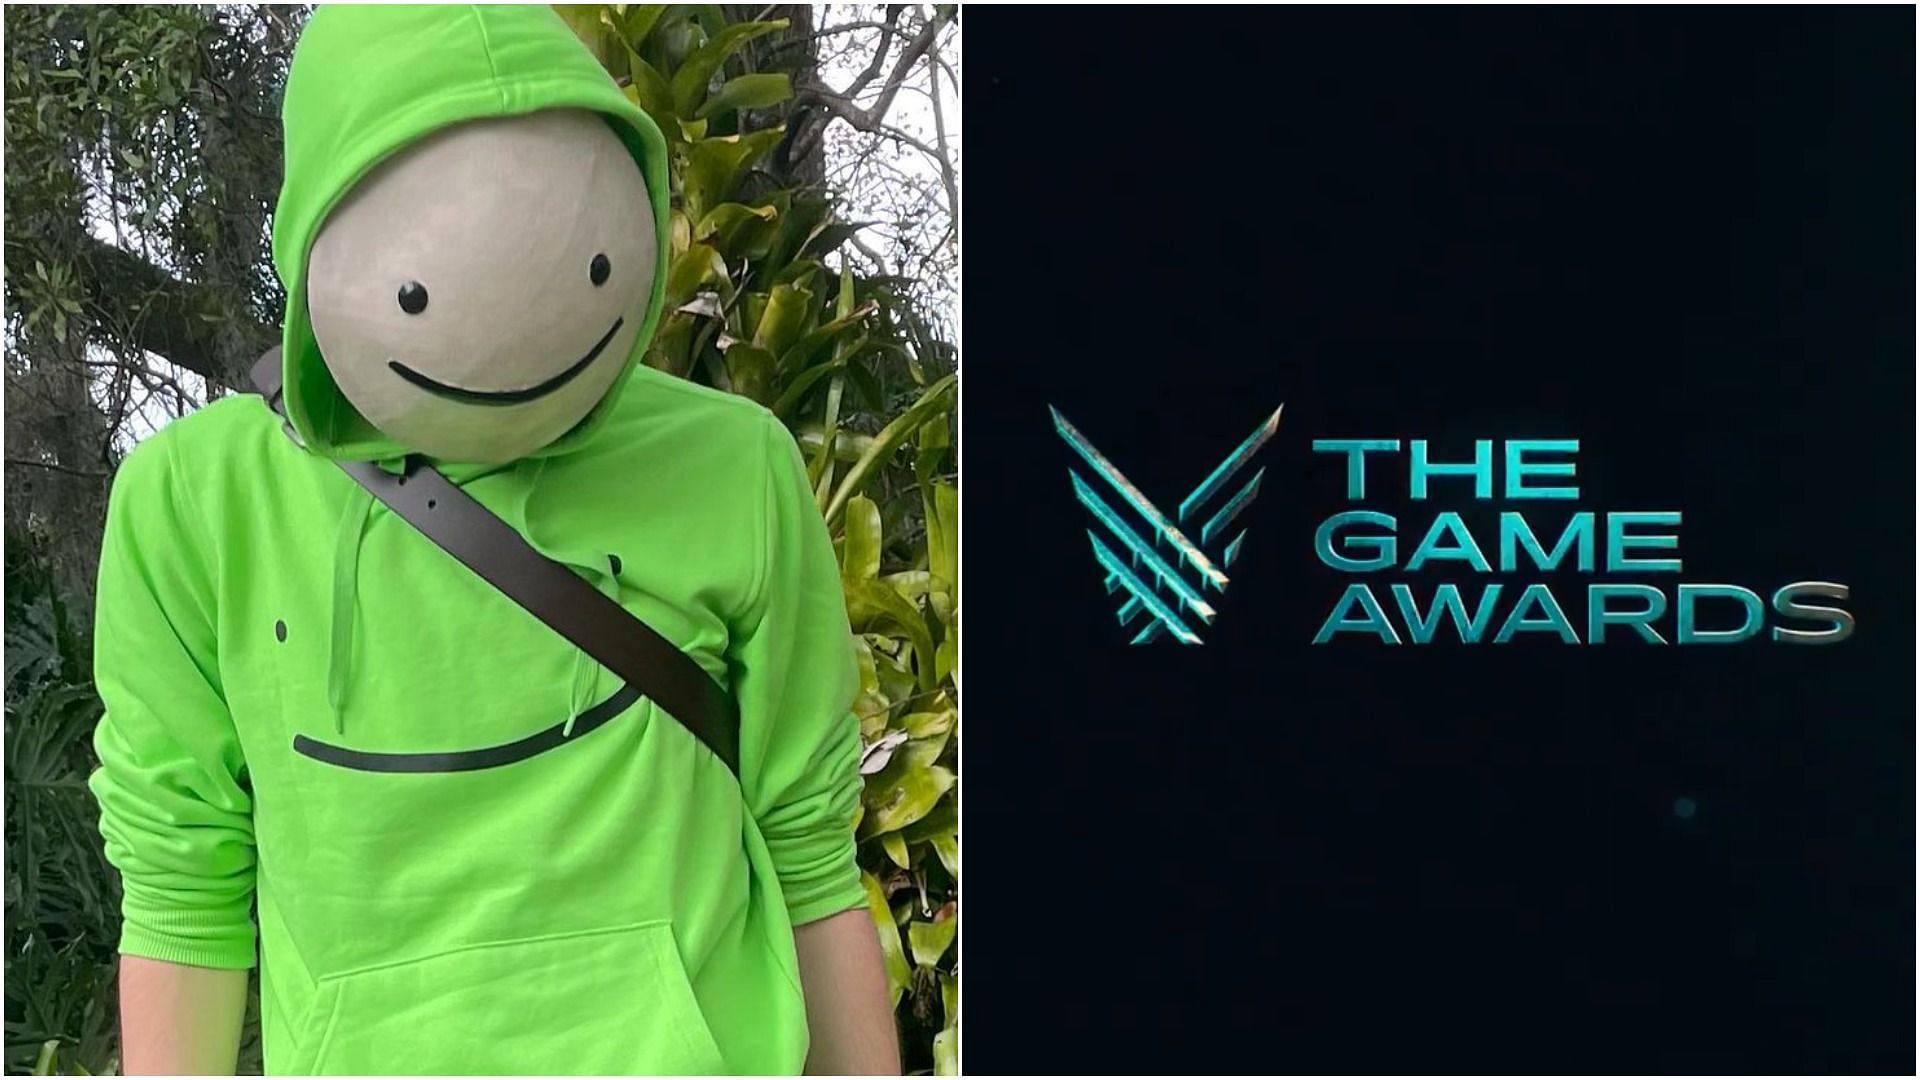 Dream is nominated for the game awards (Image via Twitter)